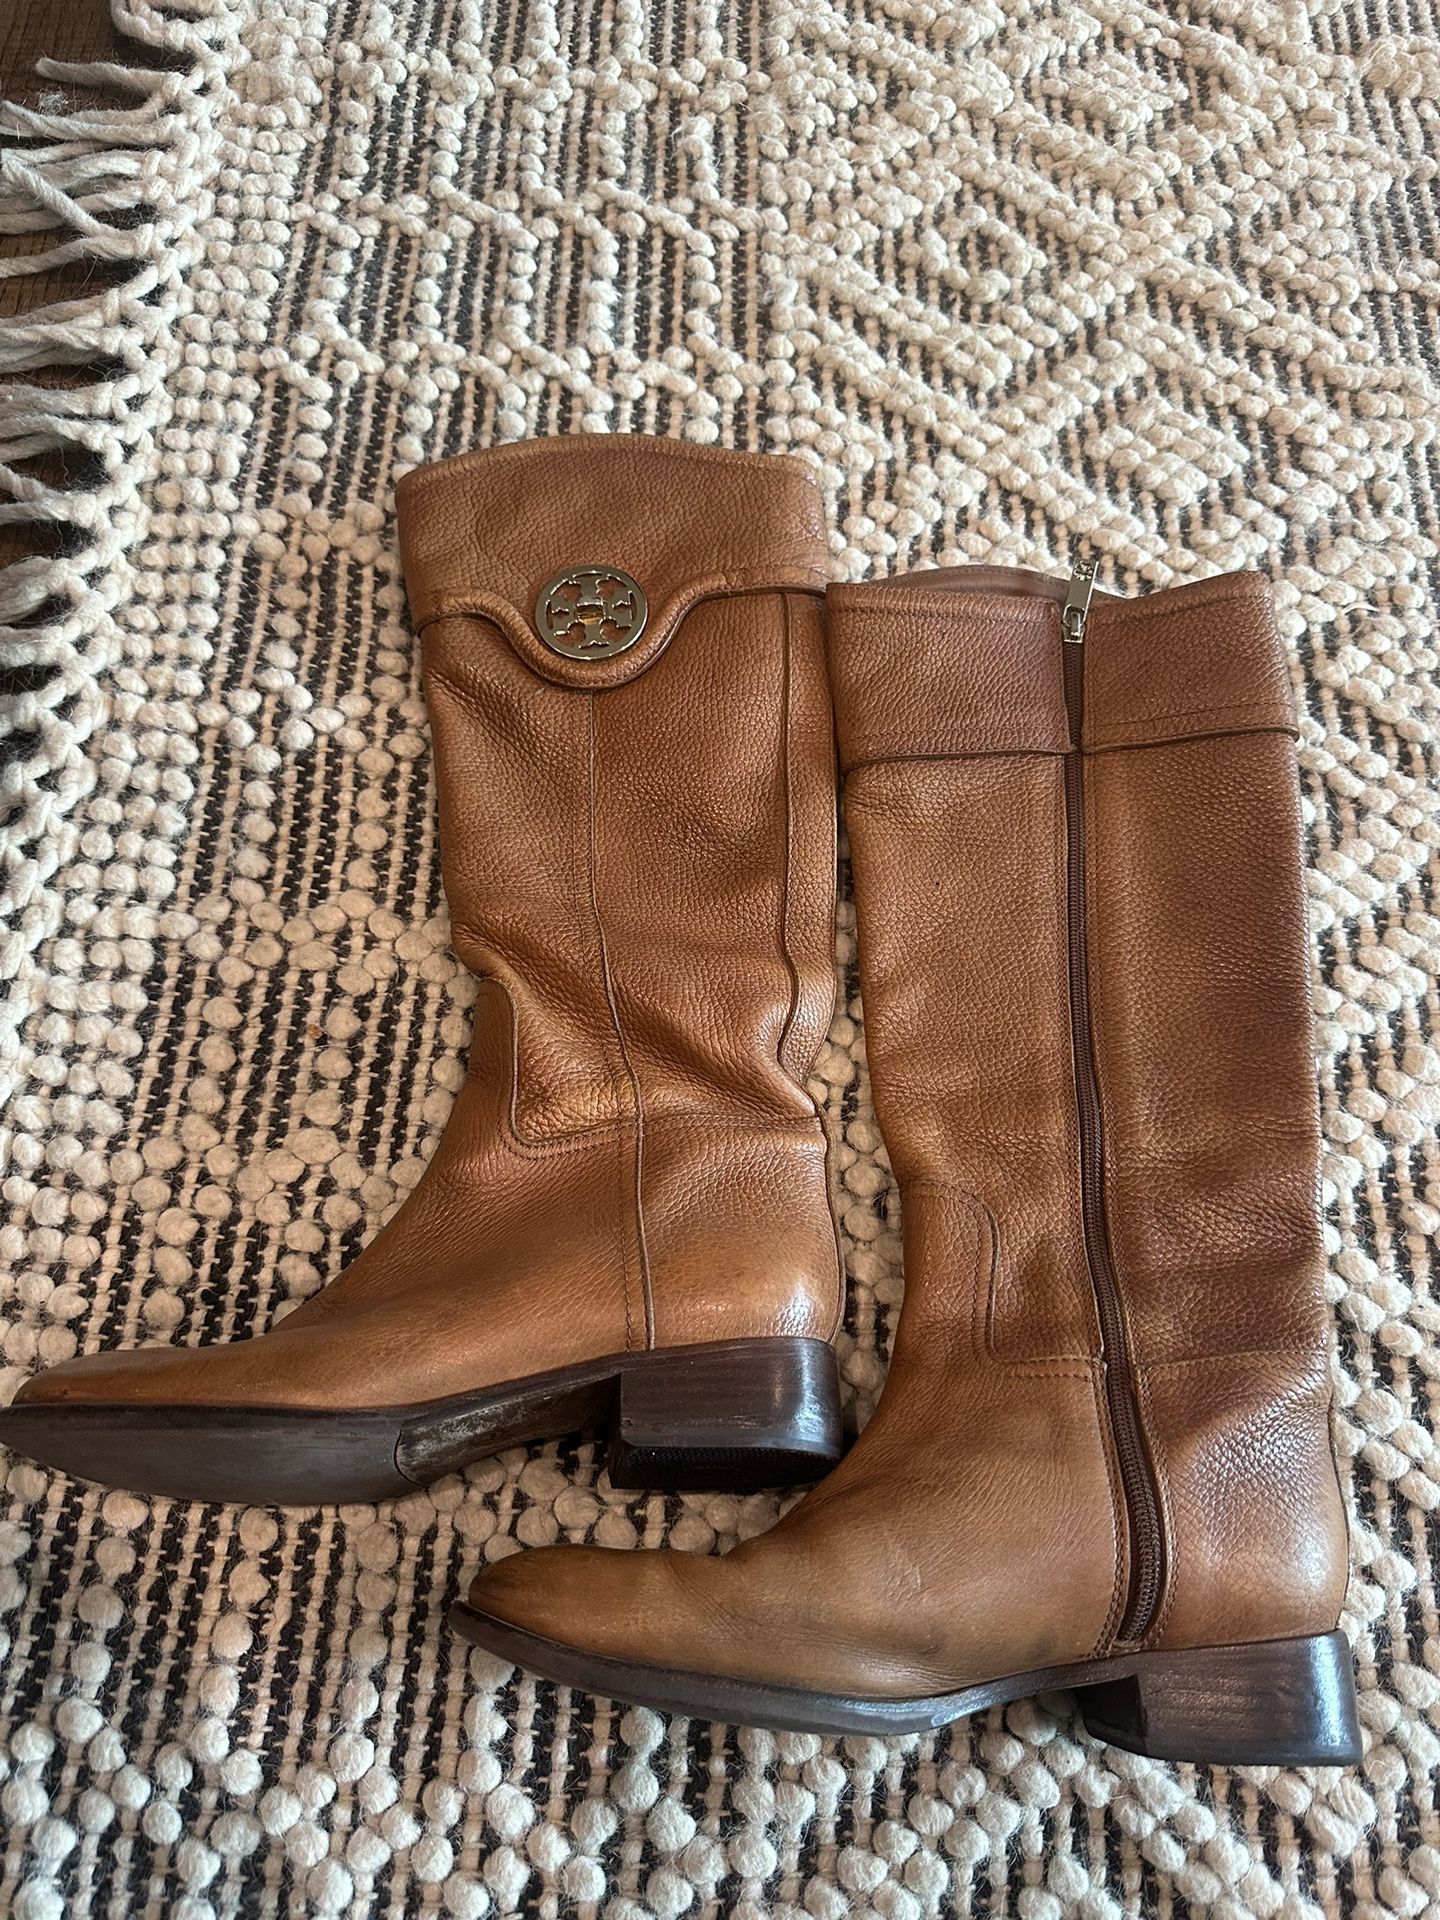 Tory Burch Women's Selma Tall Leather Riding Boots Cognac Brown Size 9